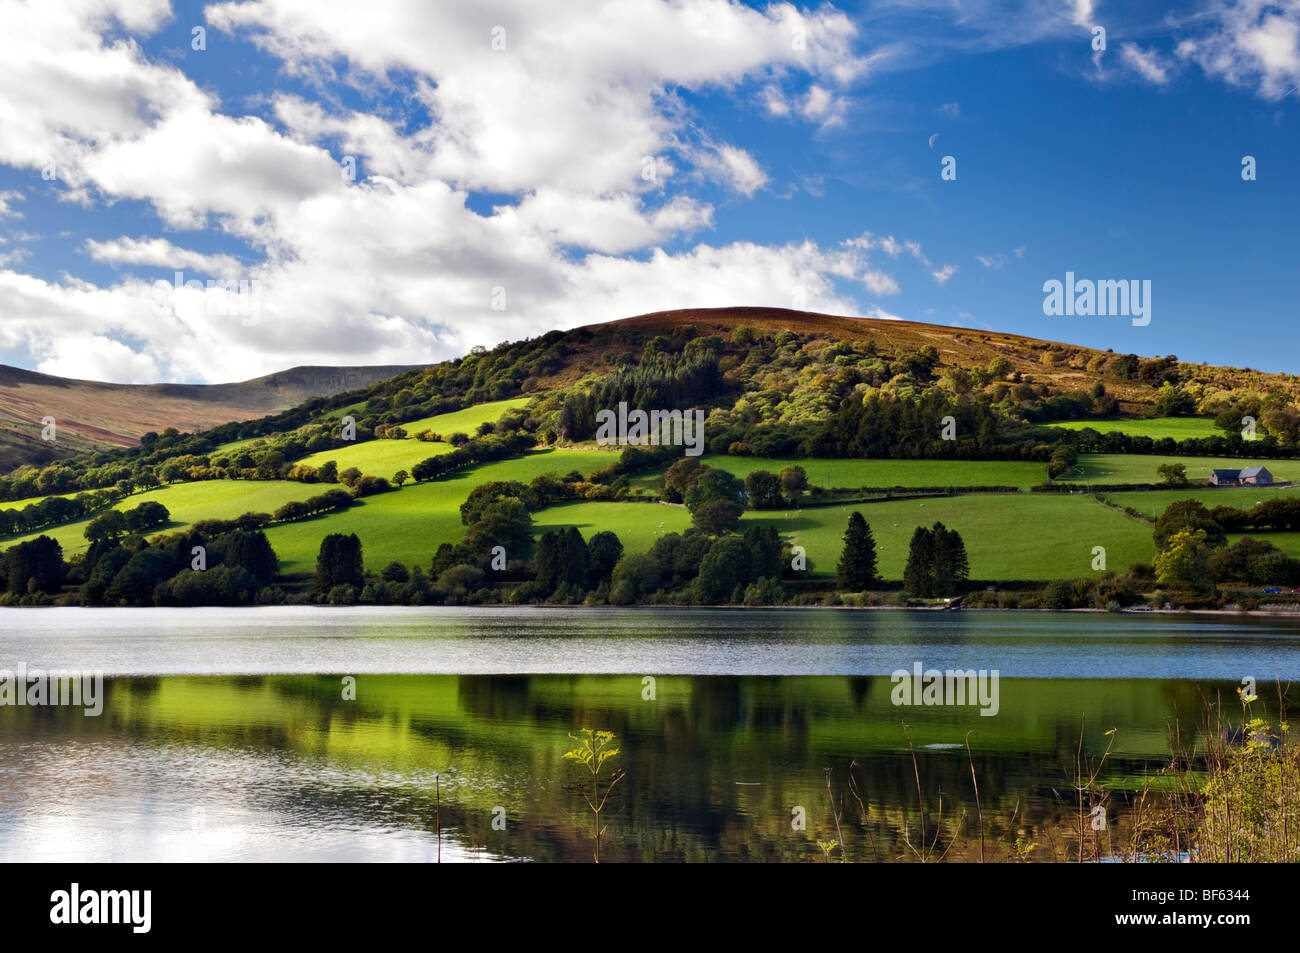 Perfect reflection at Talybont reservoir, Brecon Beacons in Wales taken on beautiful bright sunny day Stock Photo